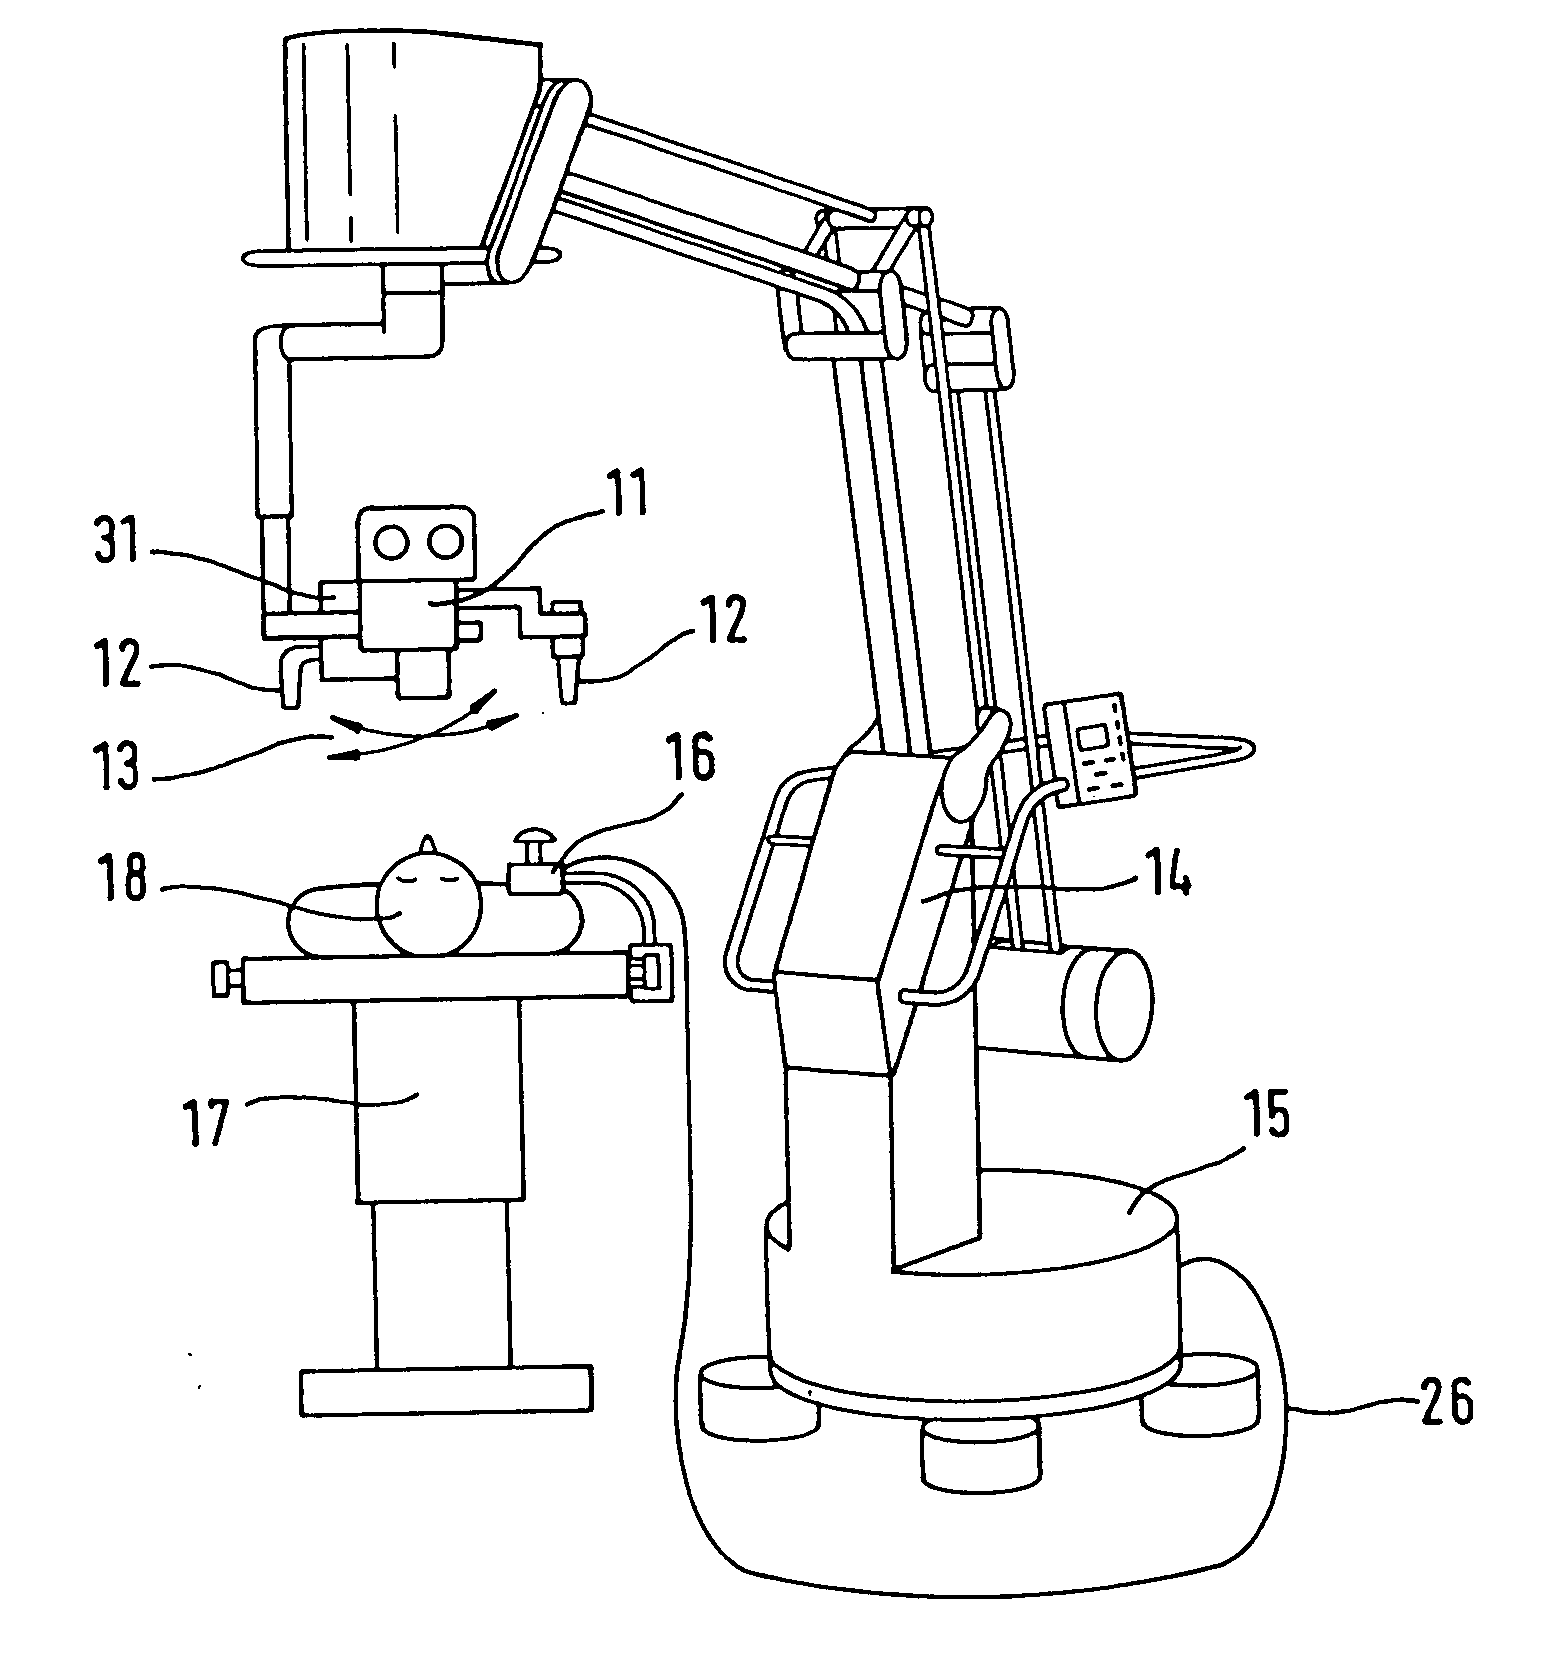 Operating-microscope system